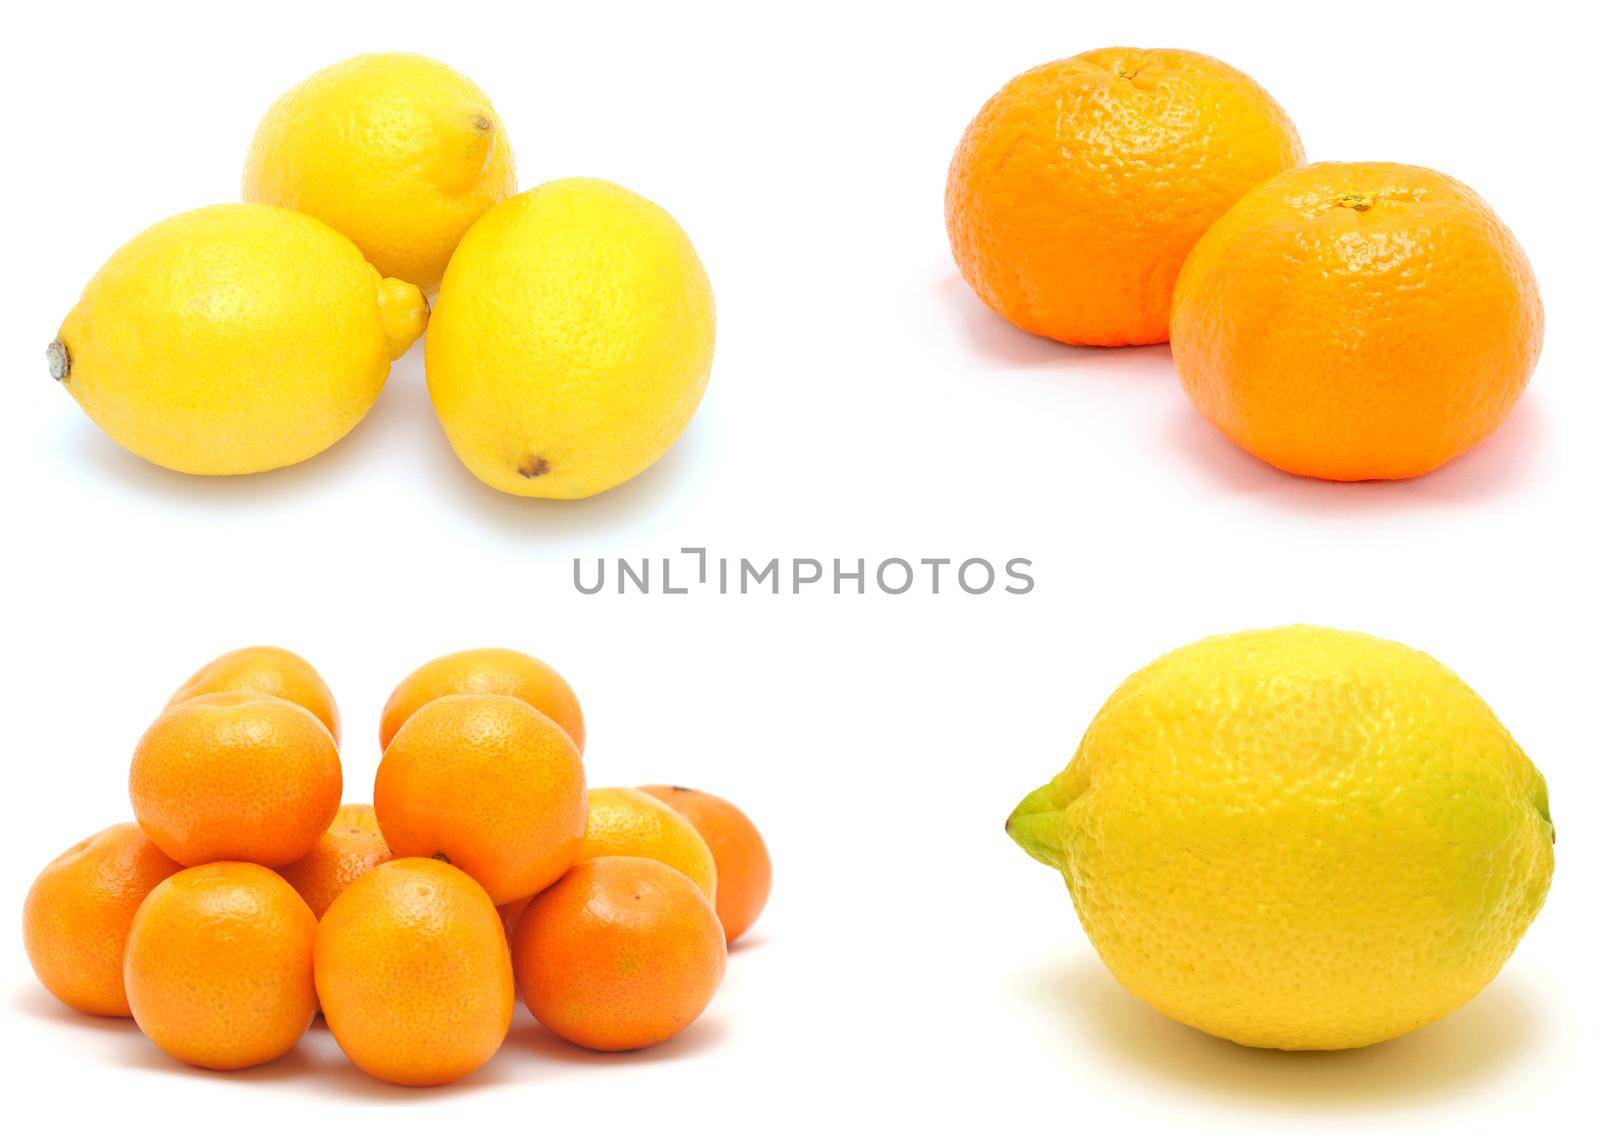 A photo collection collage of tasty fresh citrus fruit on white background.